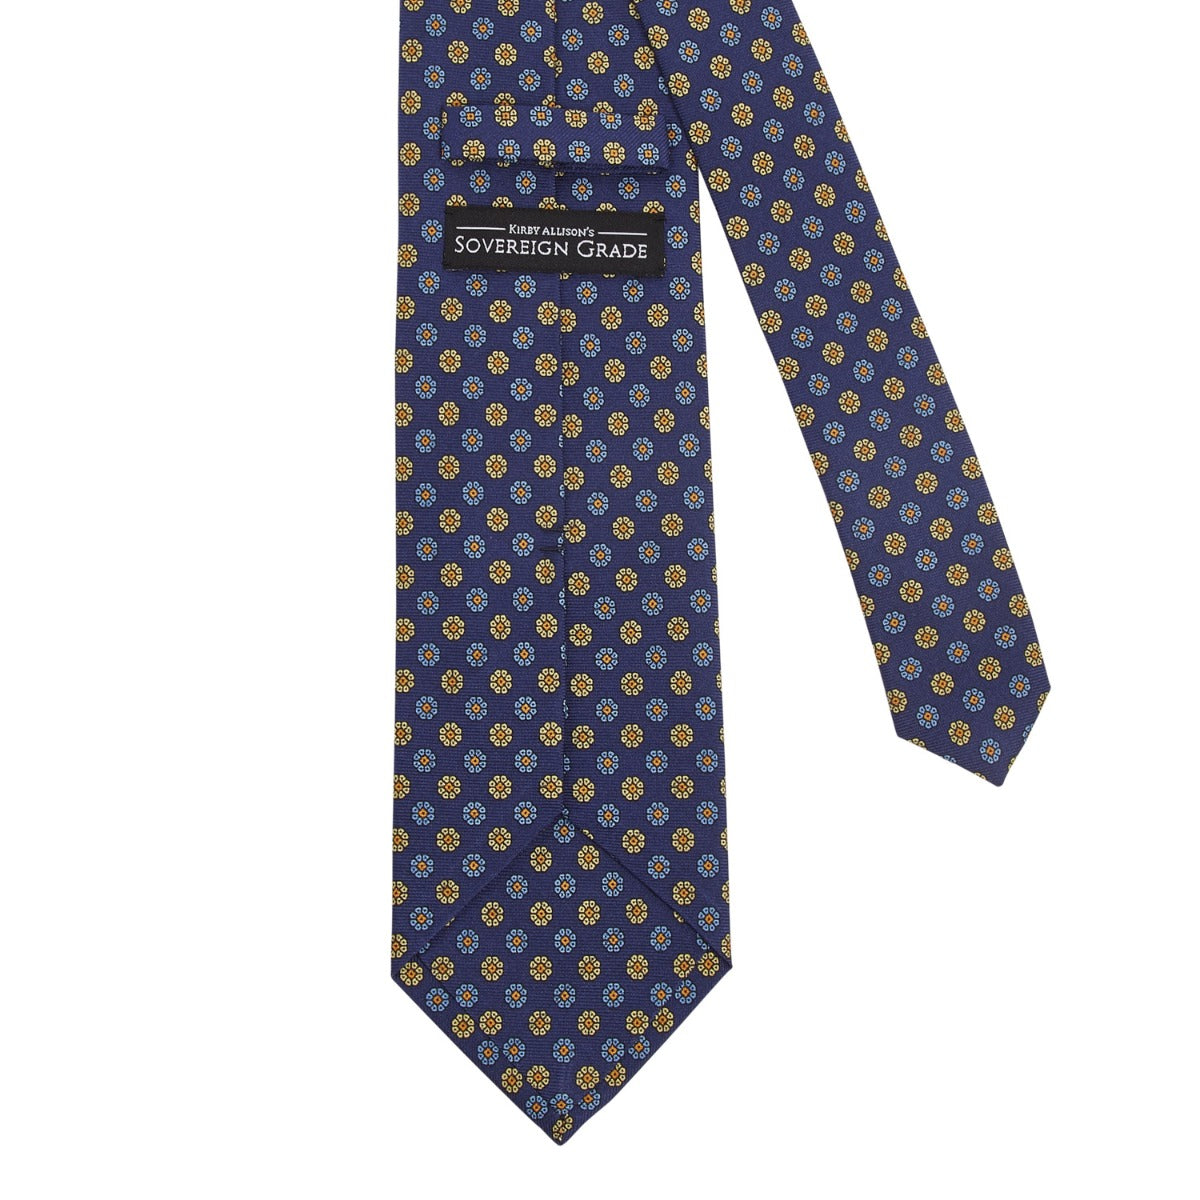 A meticulously crafted Sovereign Grade Royal/Blue/Cream Maccesfield Corn Floral Motif tie on a white background from KirbyAllison.com.